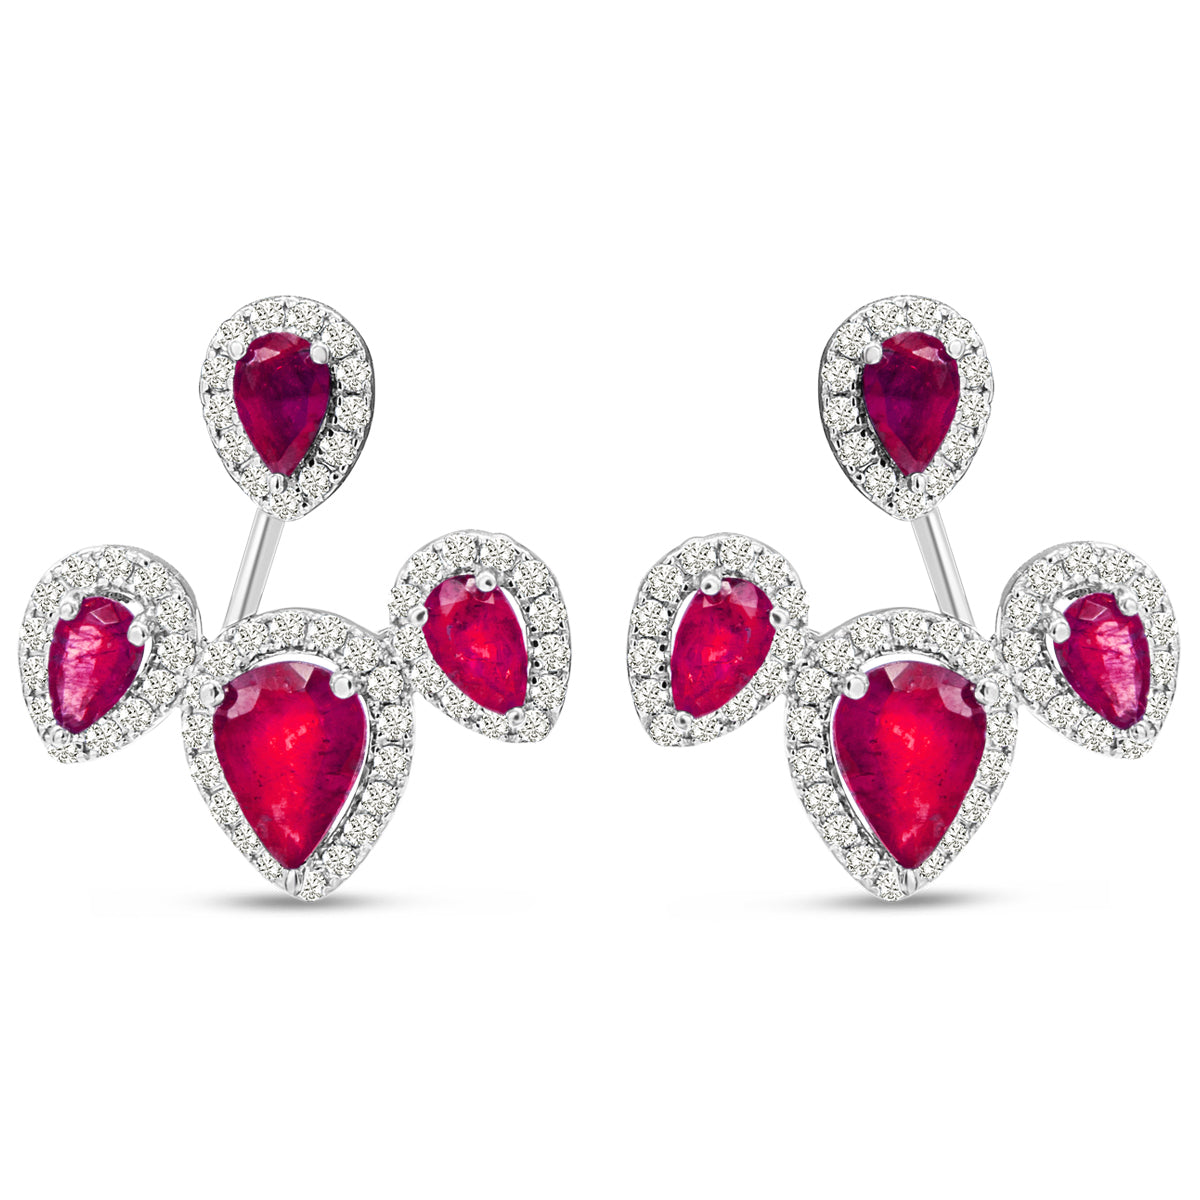 Sselects 3 Carat Ruby And Diamond Drop Earrings In 14 Karat White I-j, I1-i2 In Gold